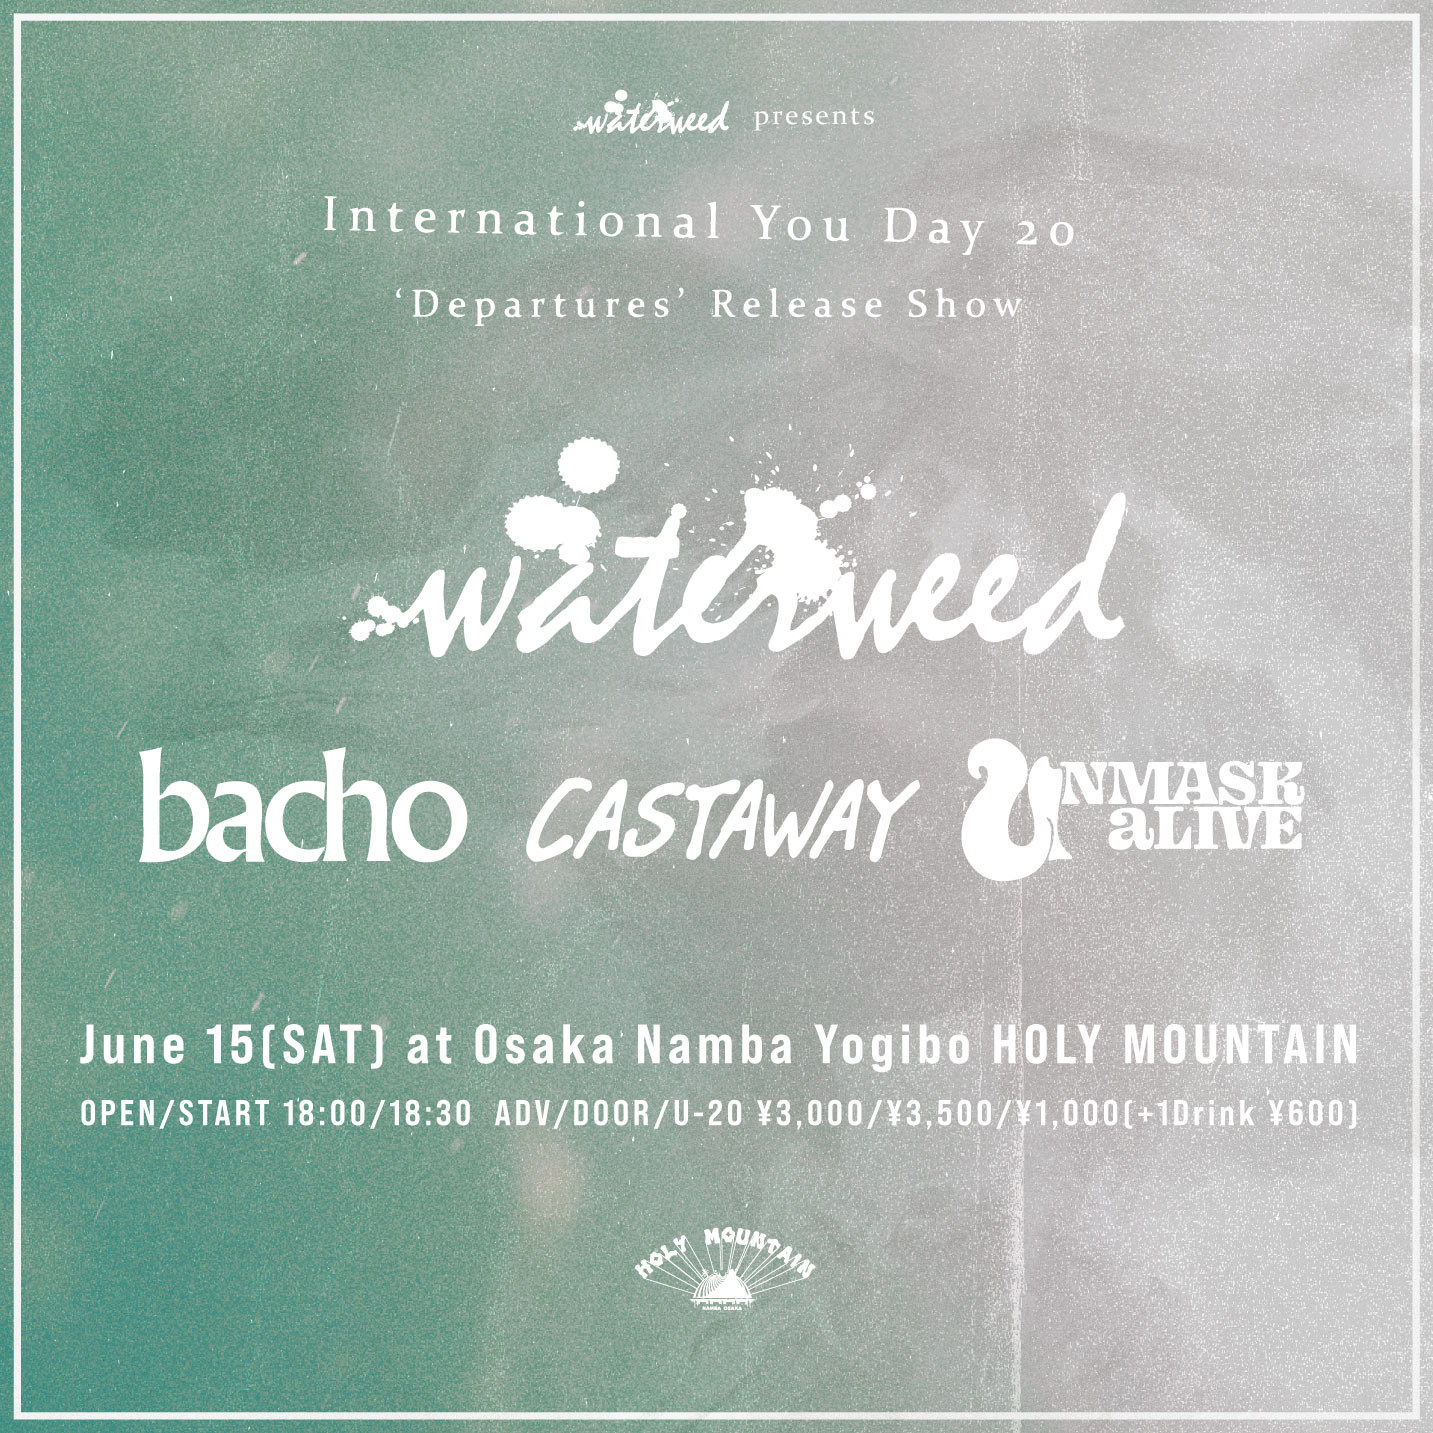 waterweed presents International You Day 20 